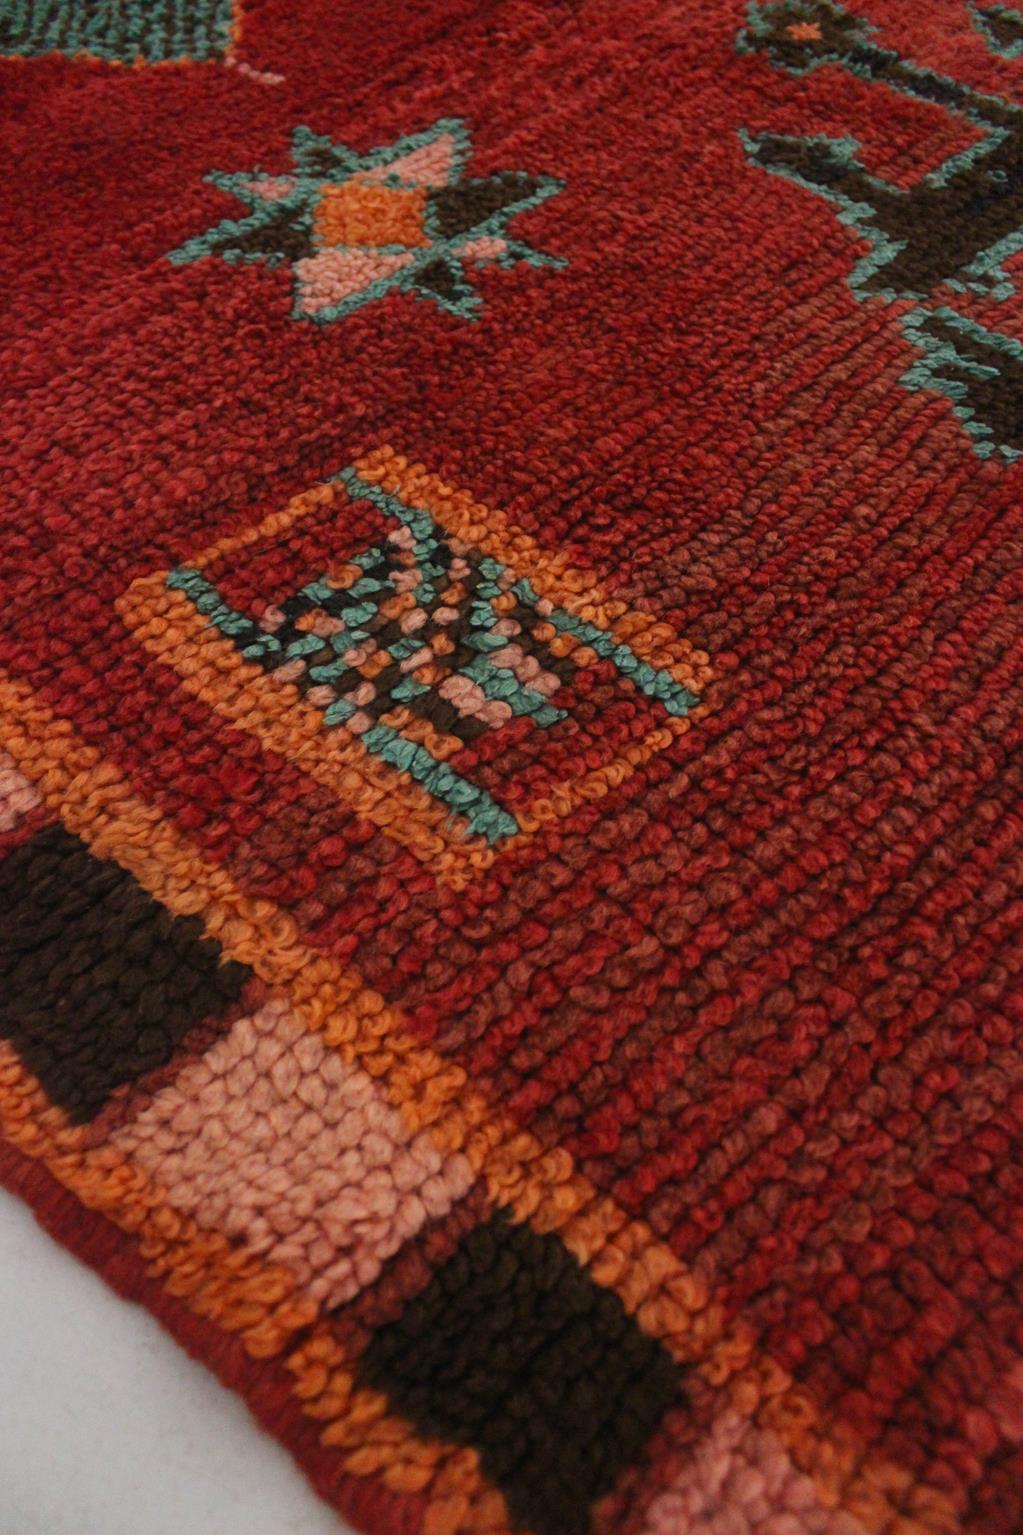 Vintage Moroccan Azilal rug - Red and turquoise - 4.1x5.8feet / 127x177cm For Sale 3